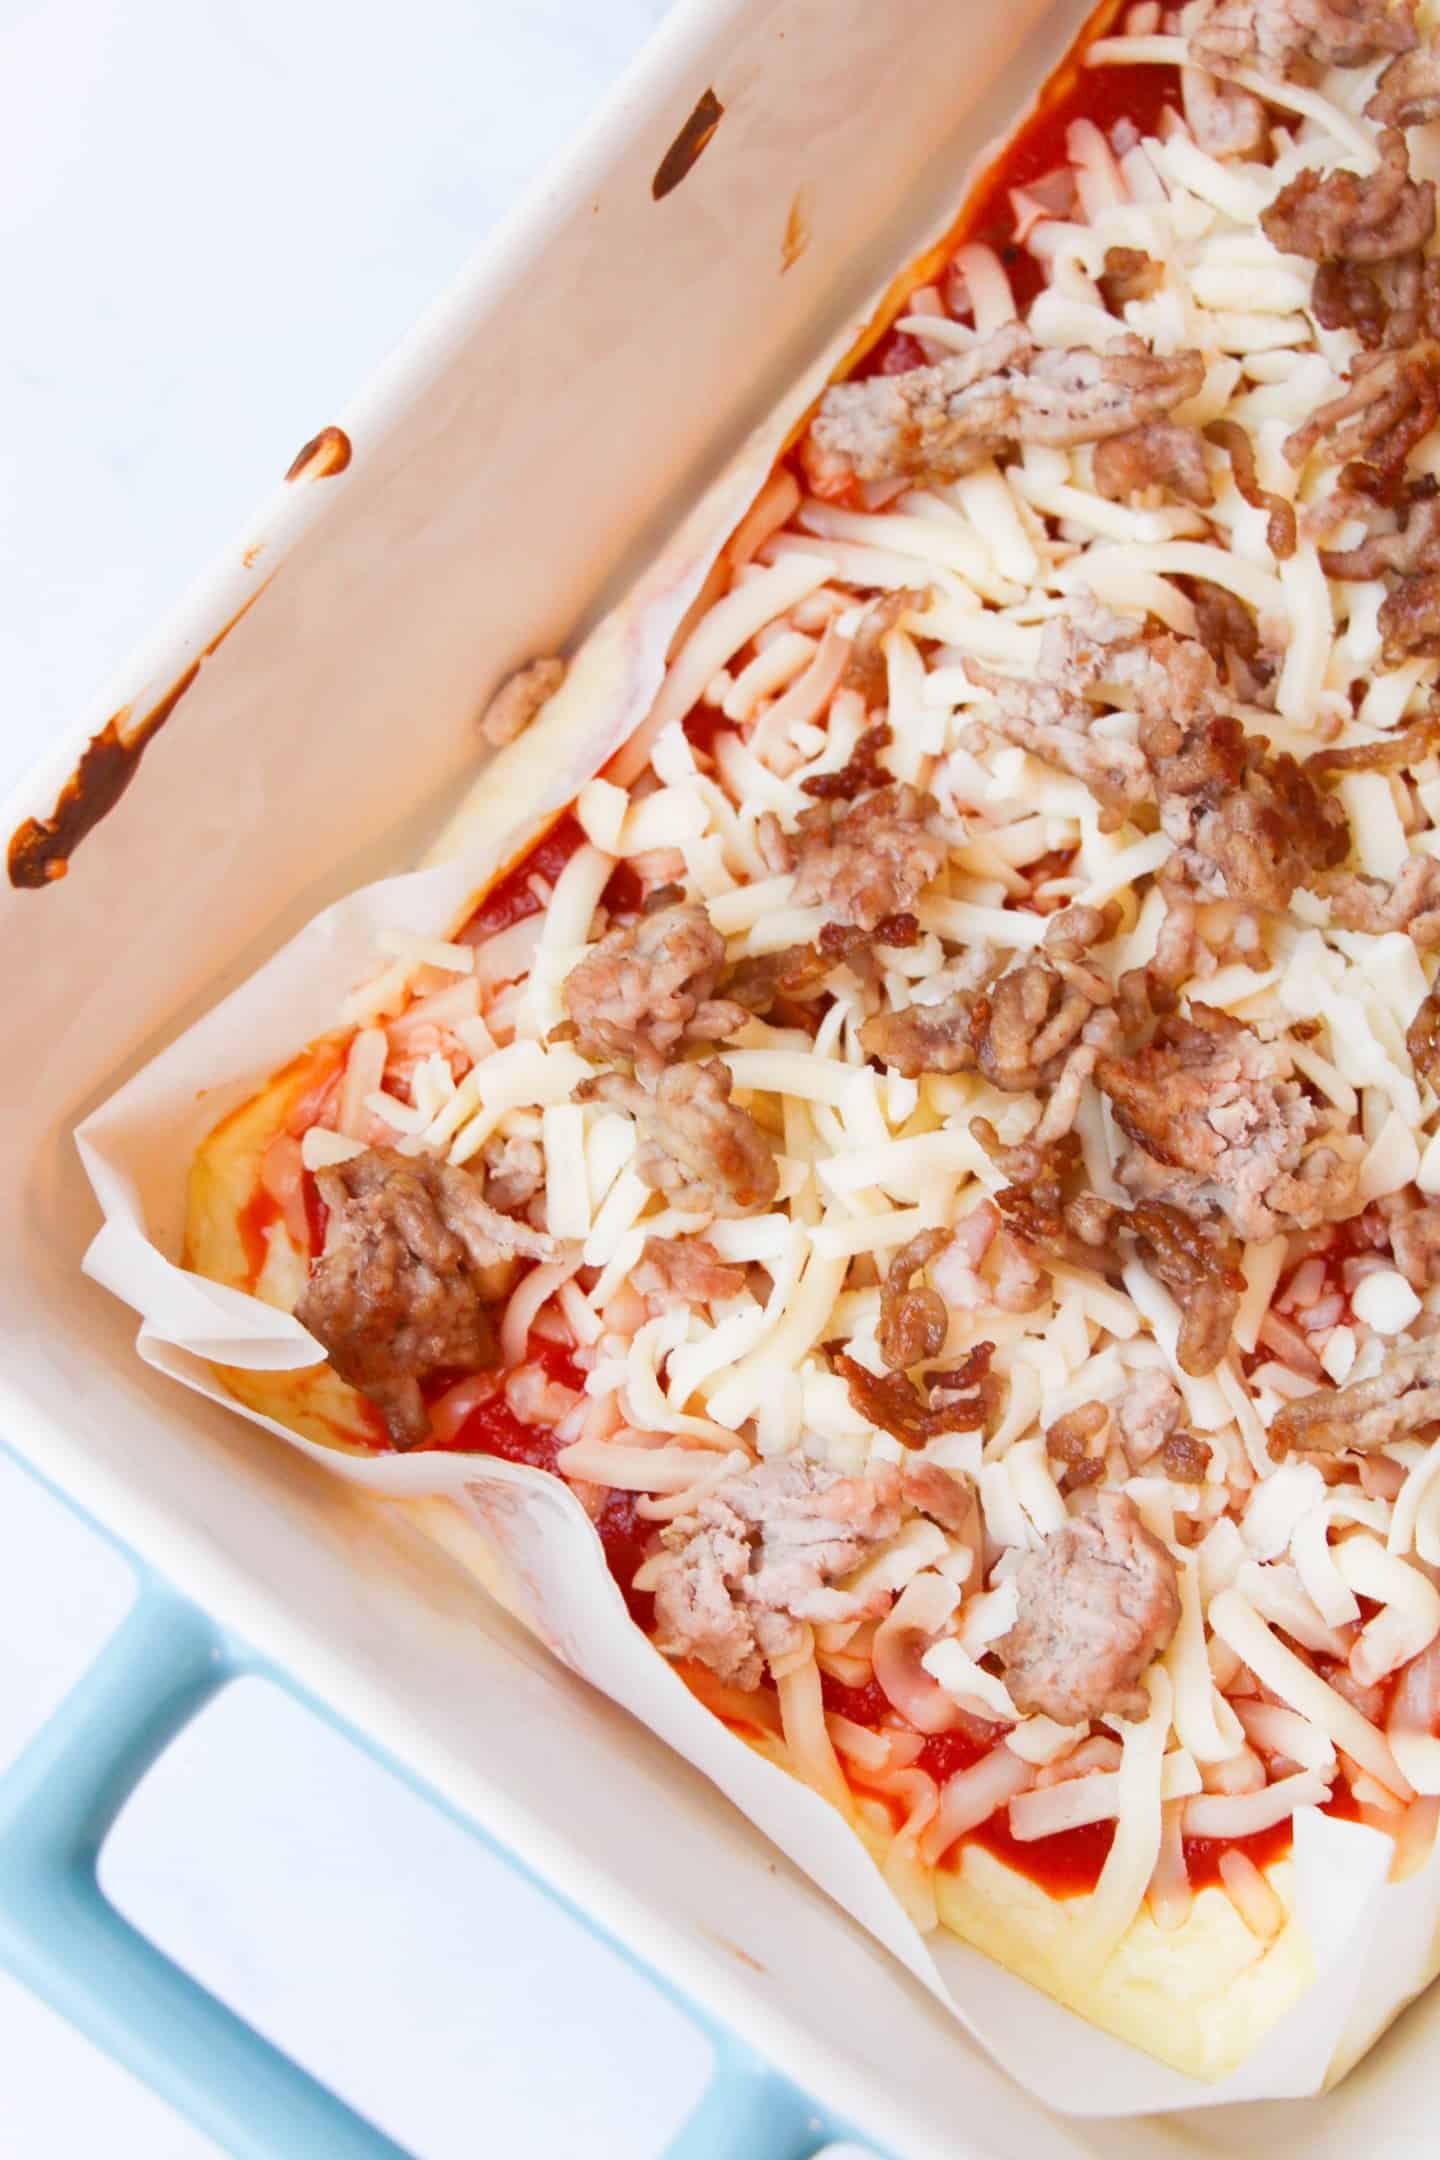 Keto Pizza with italian sausage and cheese in a baking pan